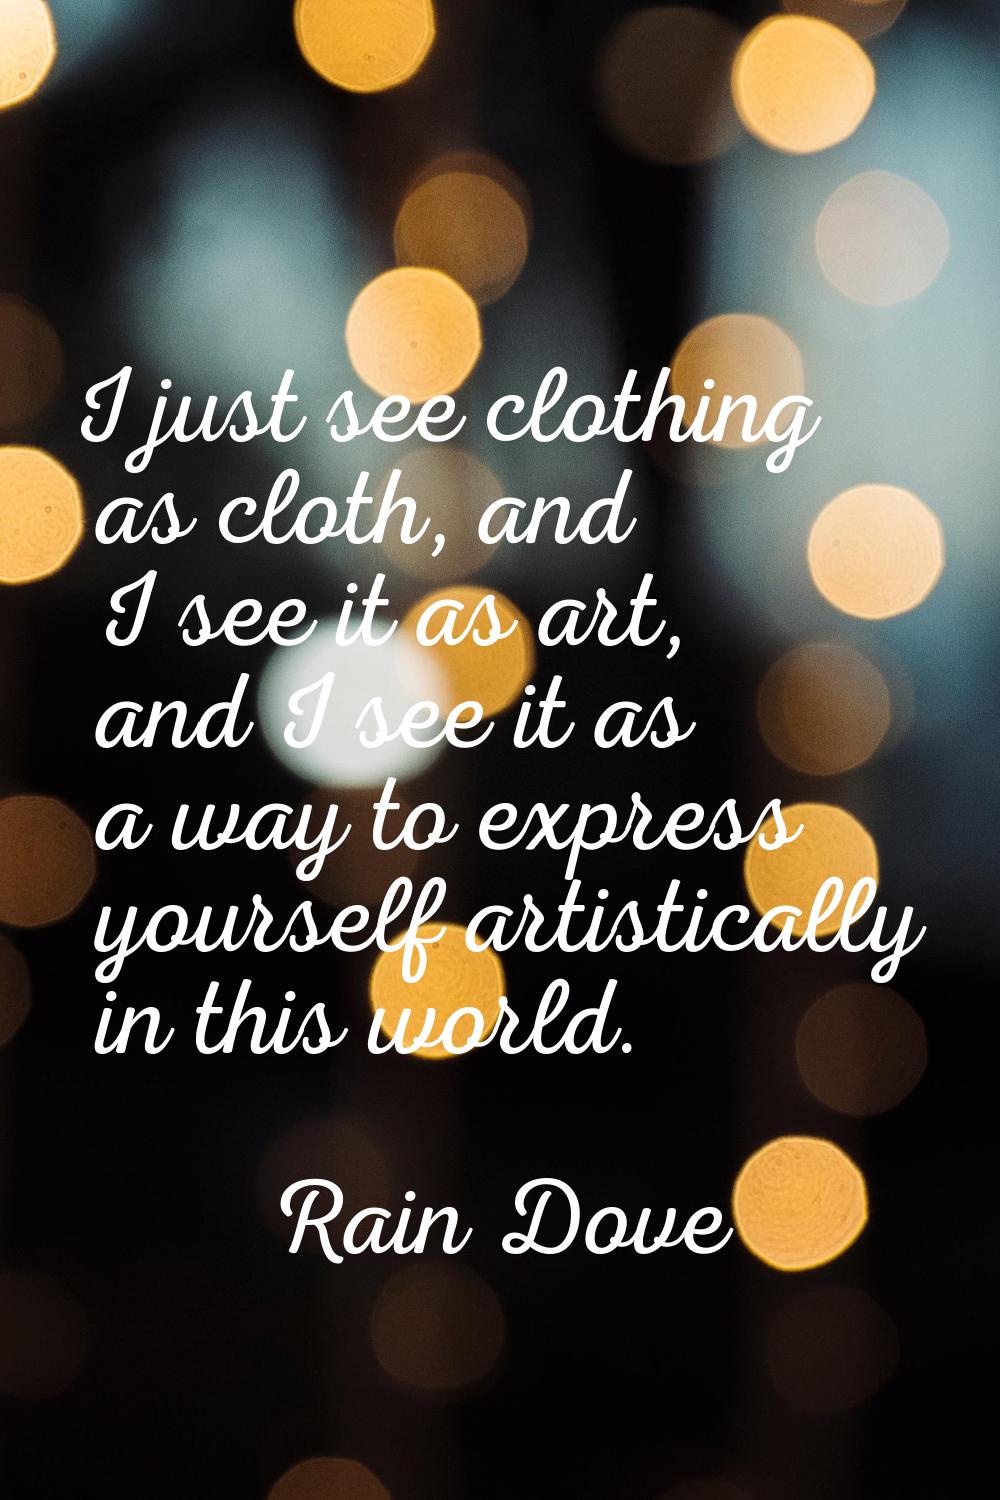 I just see clothing as cloth, and I see it as art, and I see it as a way to express yourself artist